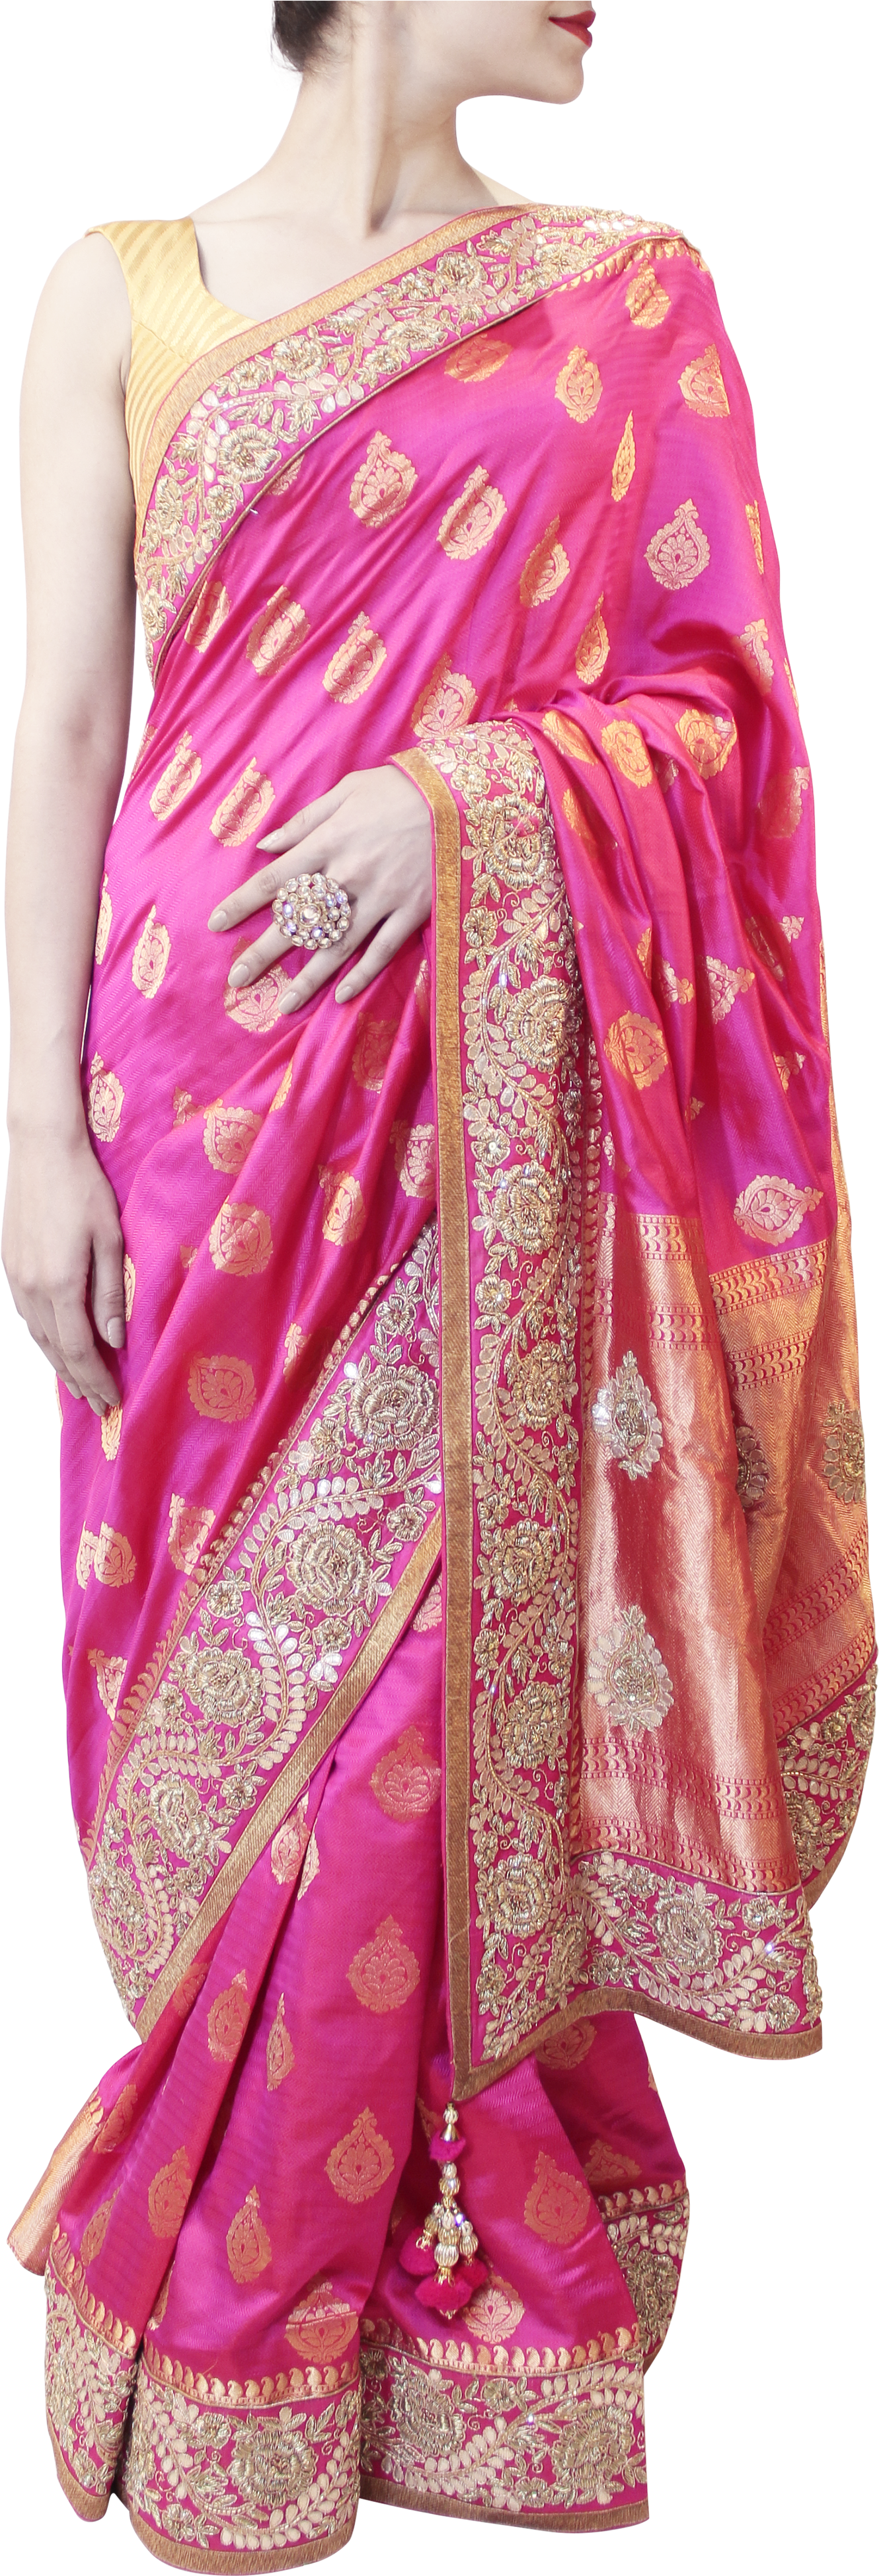 Elegant Pink Sareewith Golden Embroidery PNG